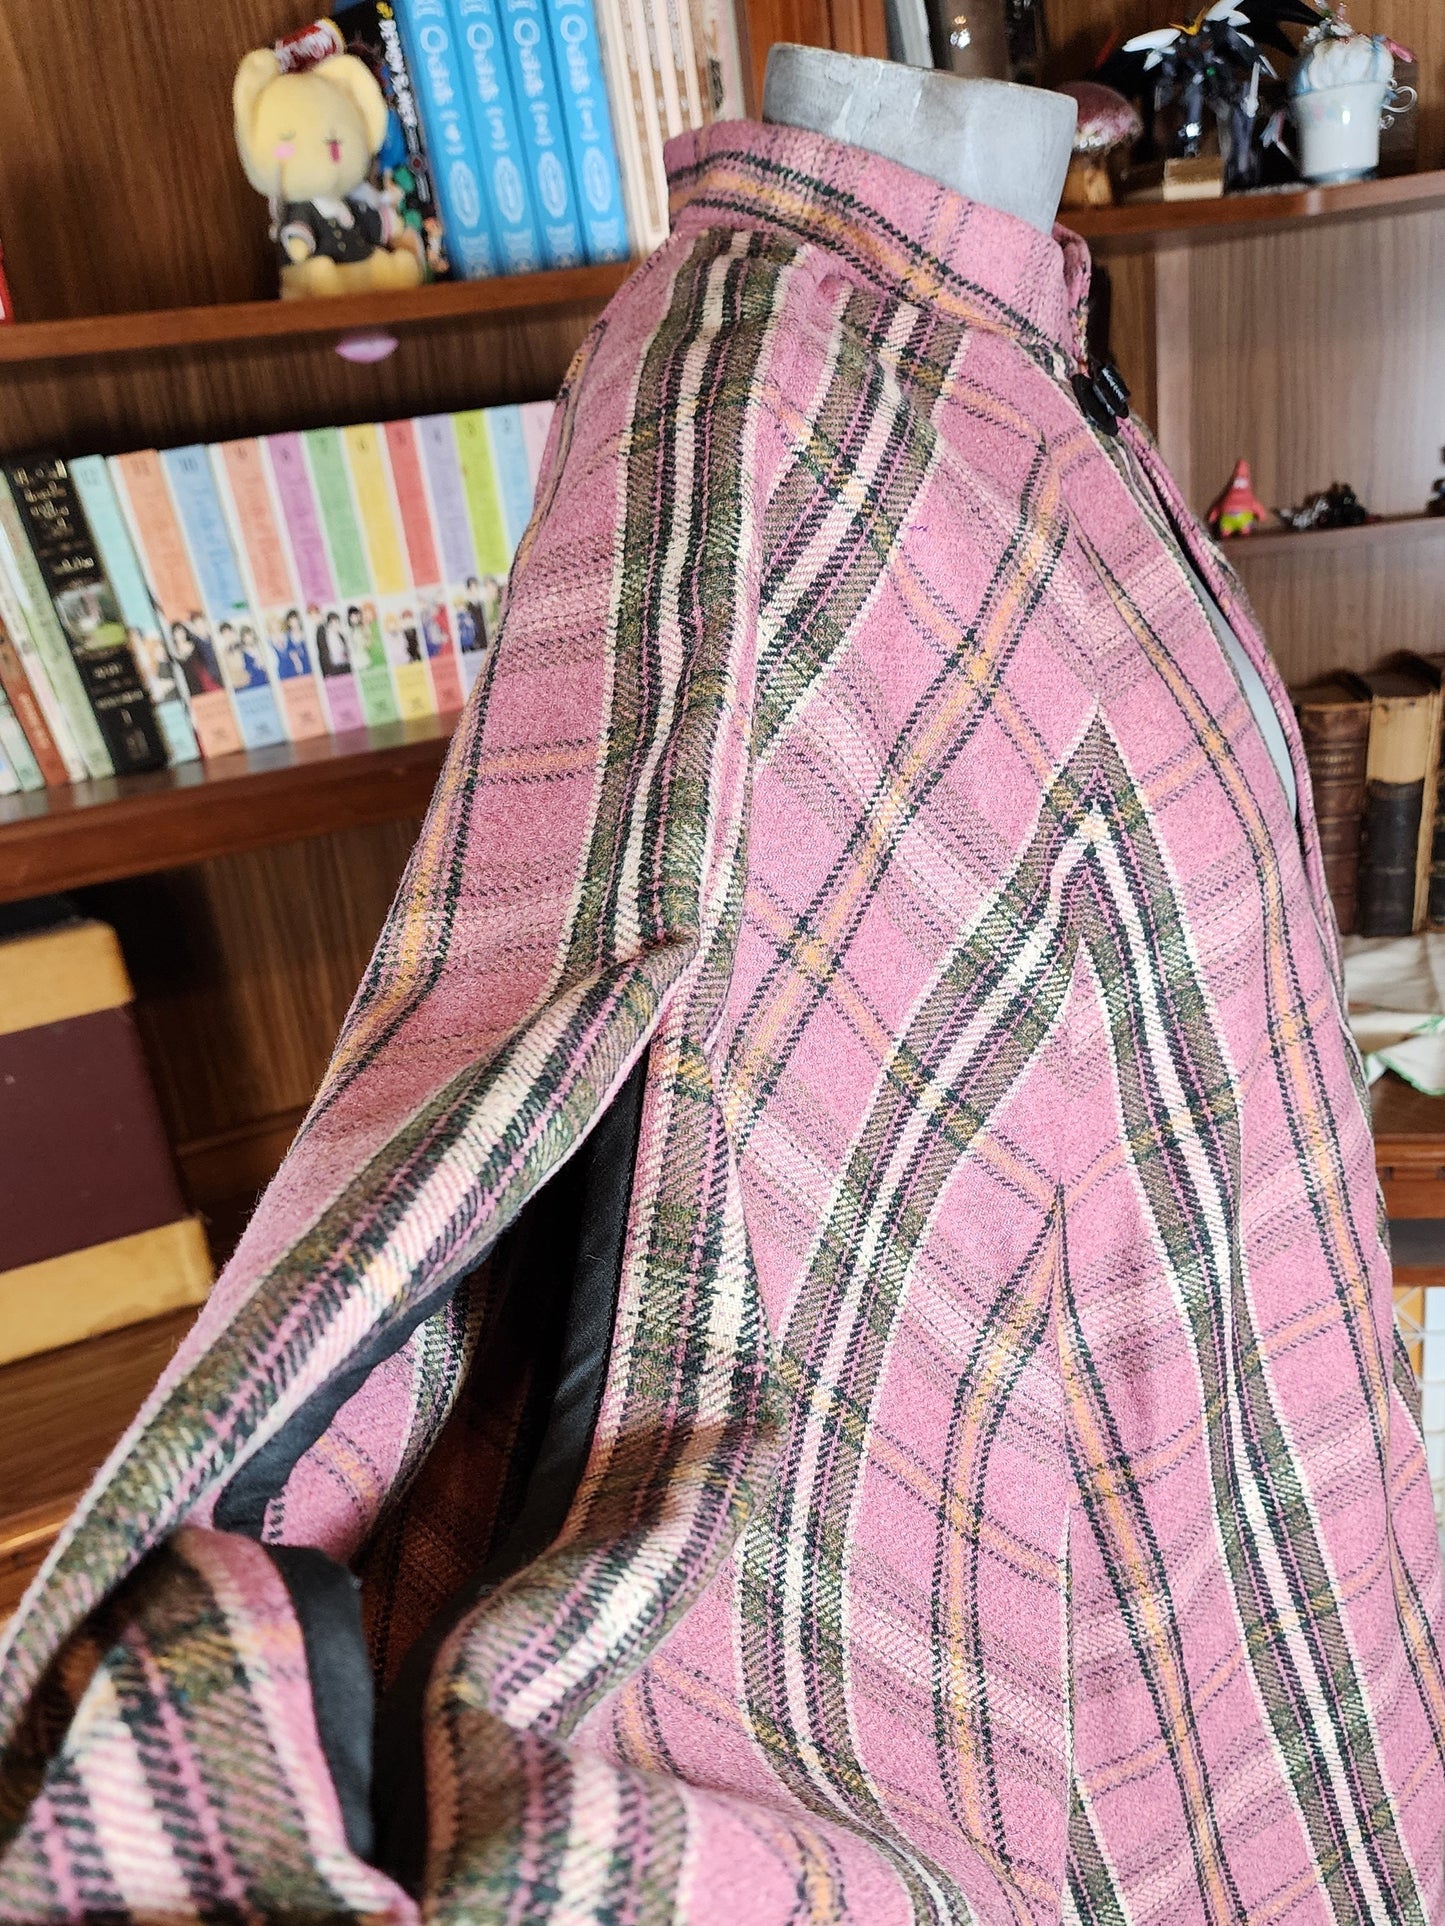 Market Day Cape- Pink Plaid Wool Blend Mid-Length Cape with Collar and Arm Slits